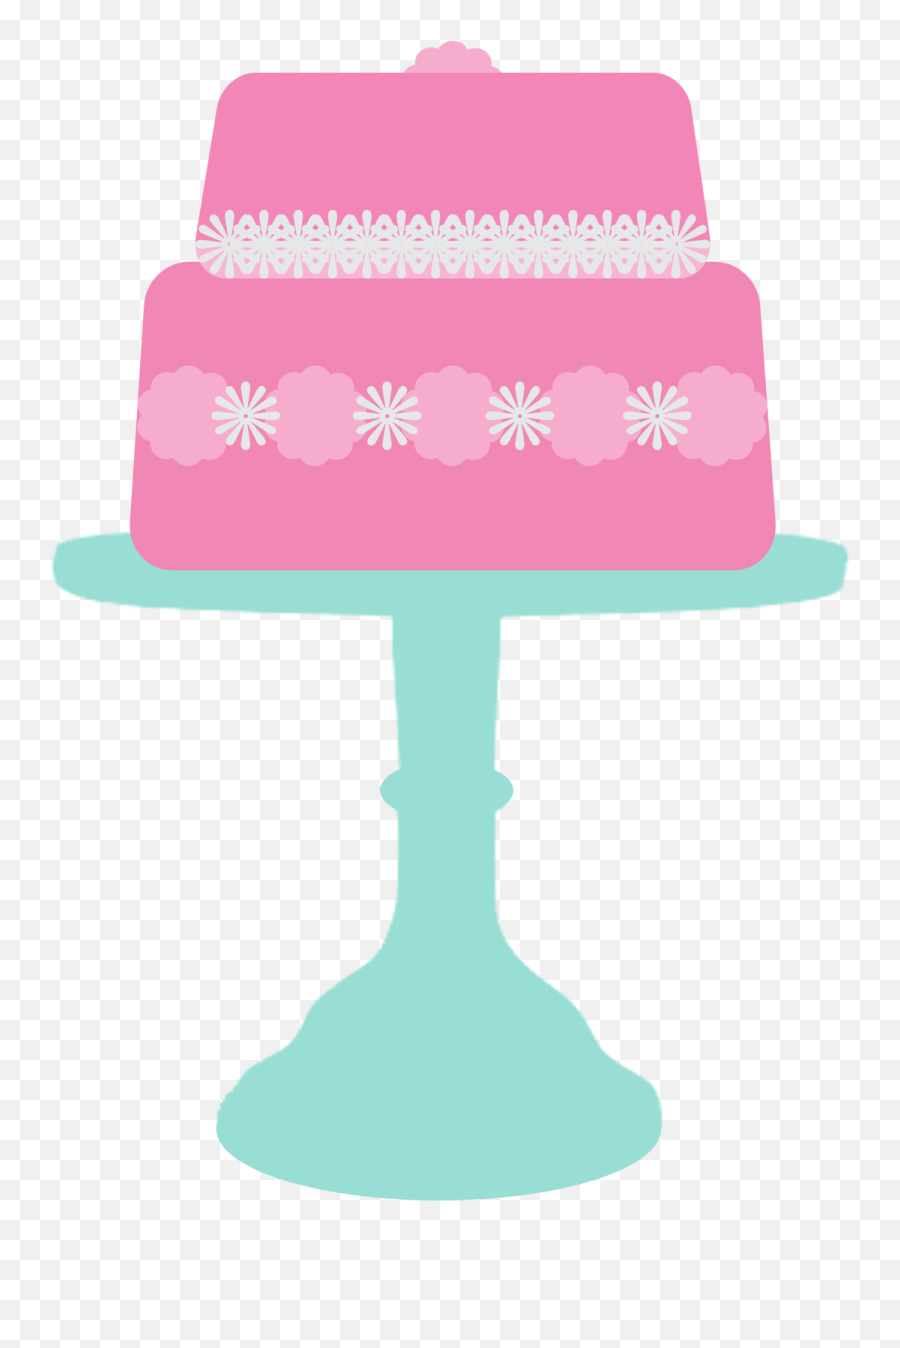 Free Free Cake Pictures Download Free Free Cake Pictures Emoji,Emoji Birthday Party Flyers Psd